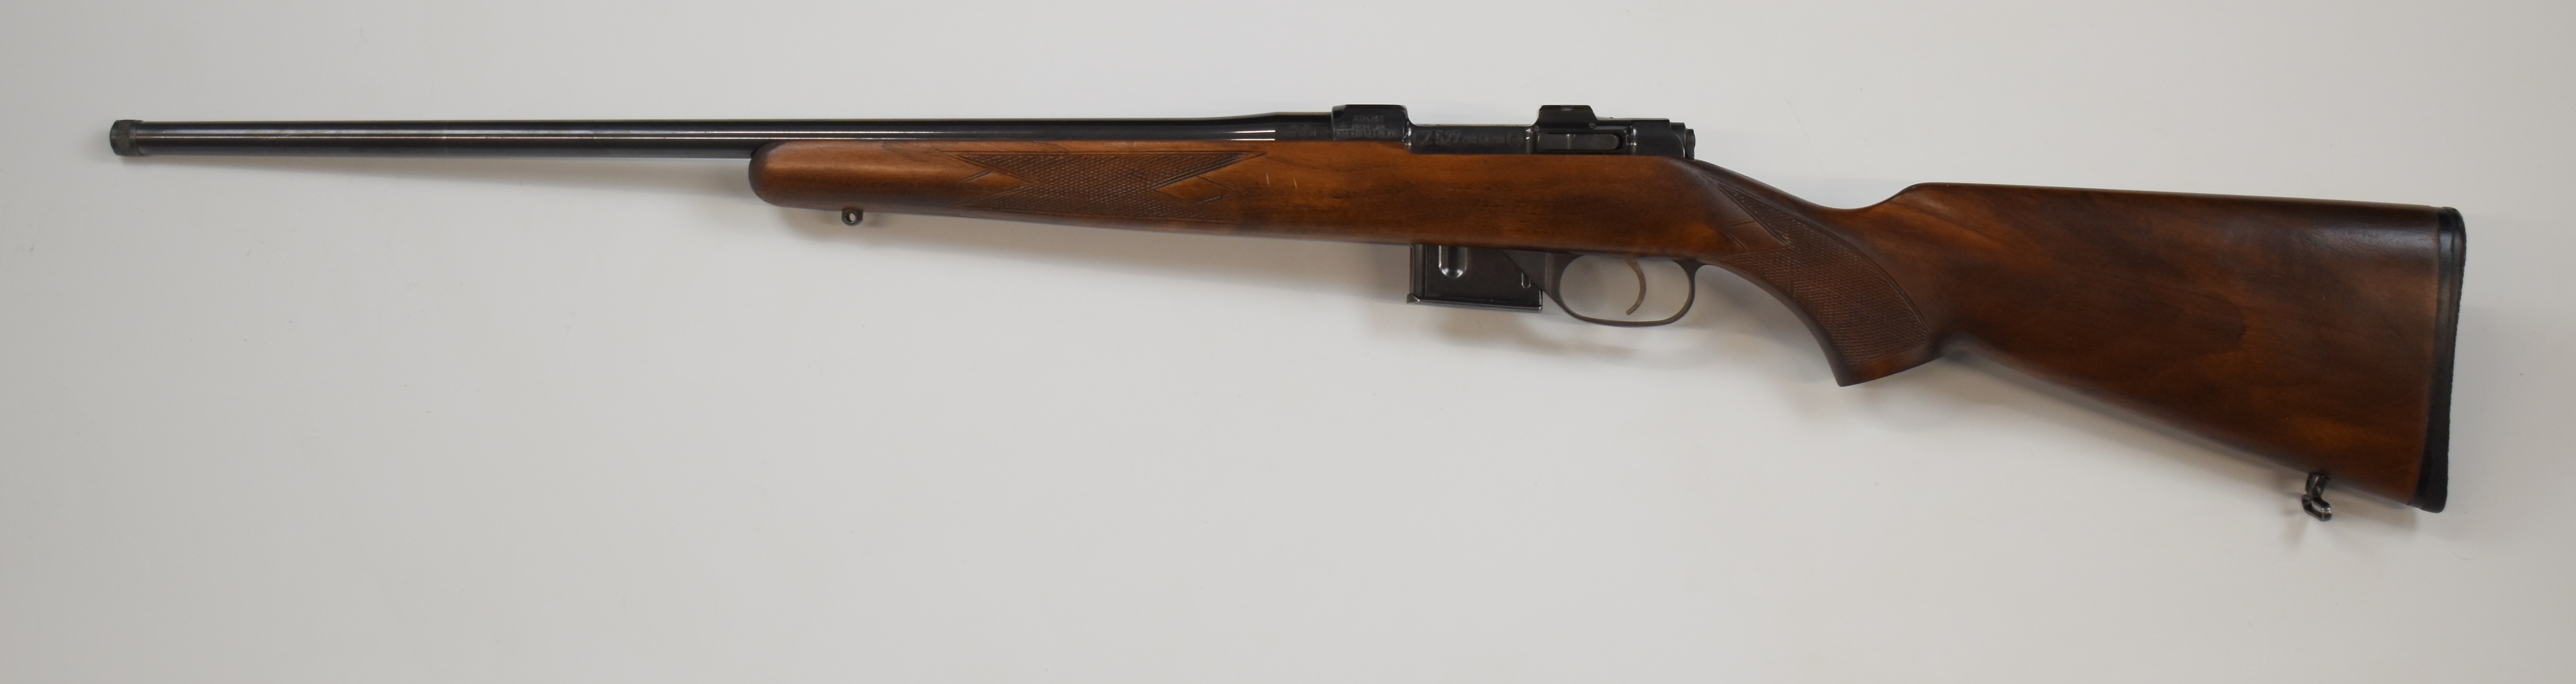 CZ 527 American .222 Remington bolt-action rifle with chequered semi-pistol grip and forend, sling - Image 6 of 10